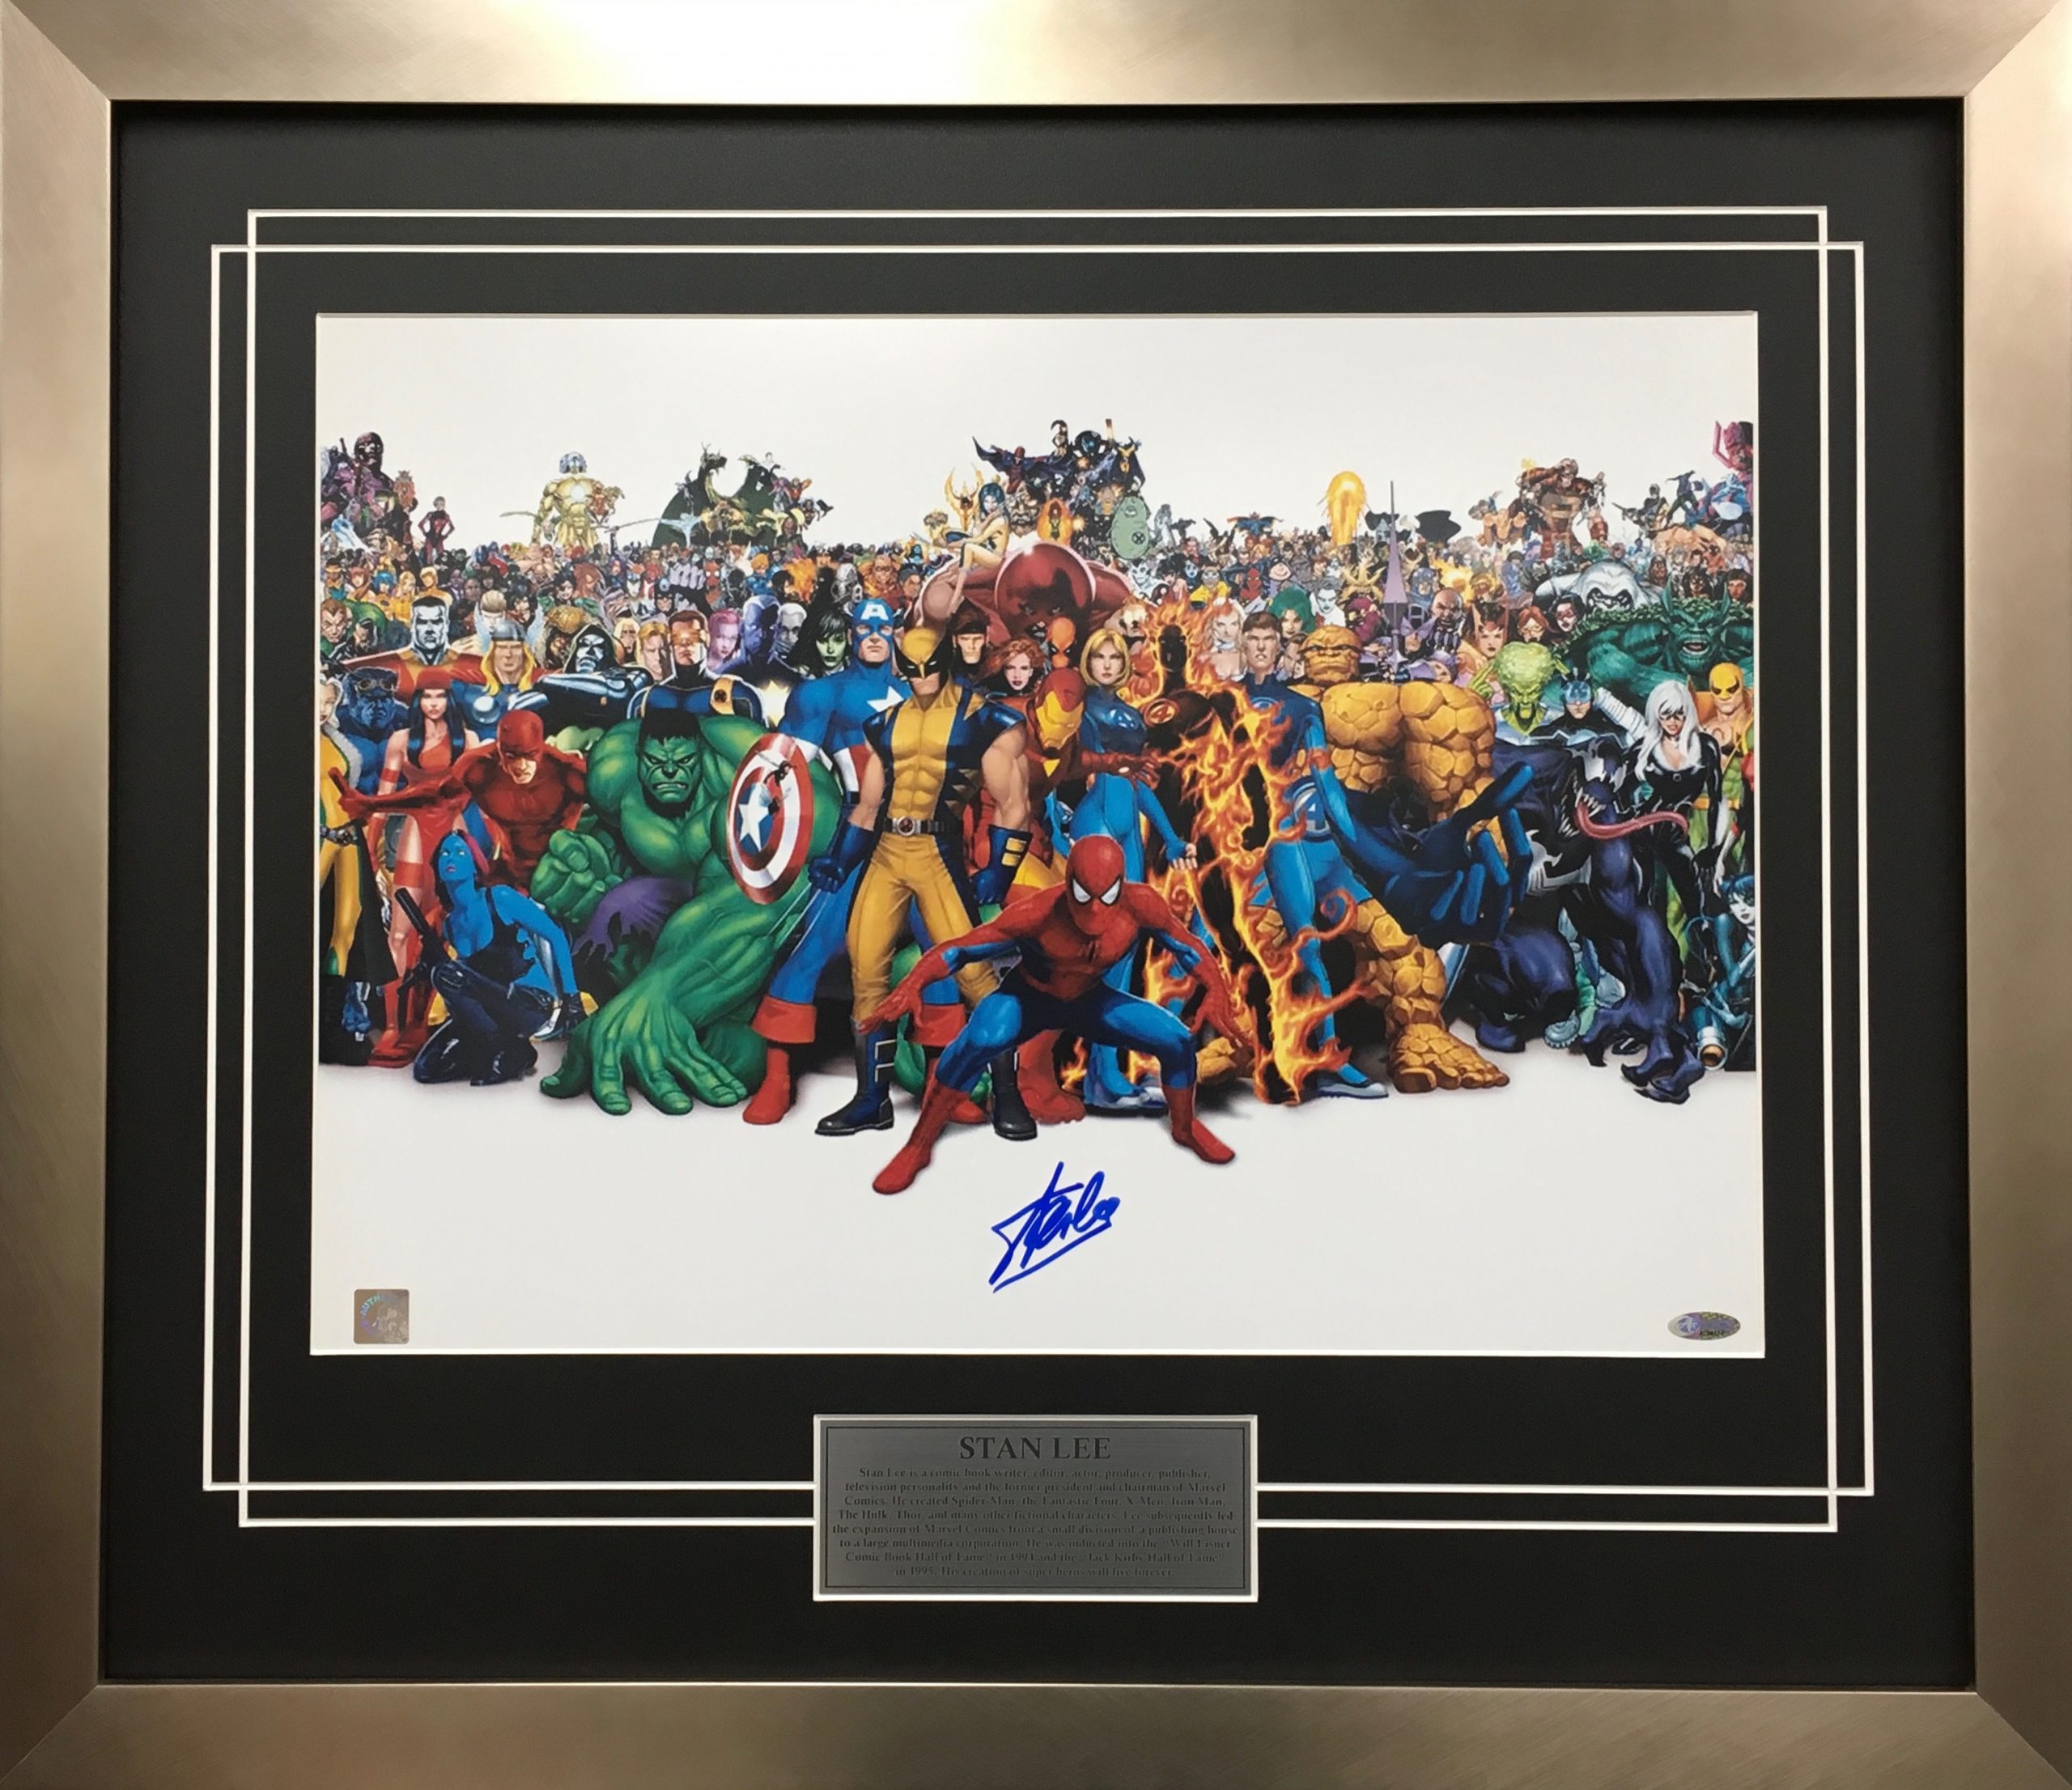 STAN LEE NAMEPLATE FOR SIGNED PHOTO/MOVIE POSTERS/COMIC BOOKS 